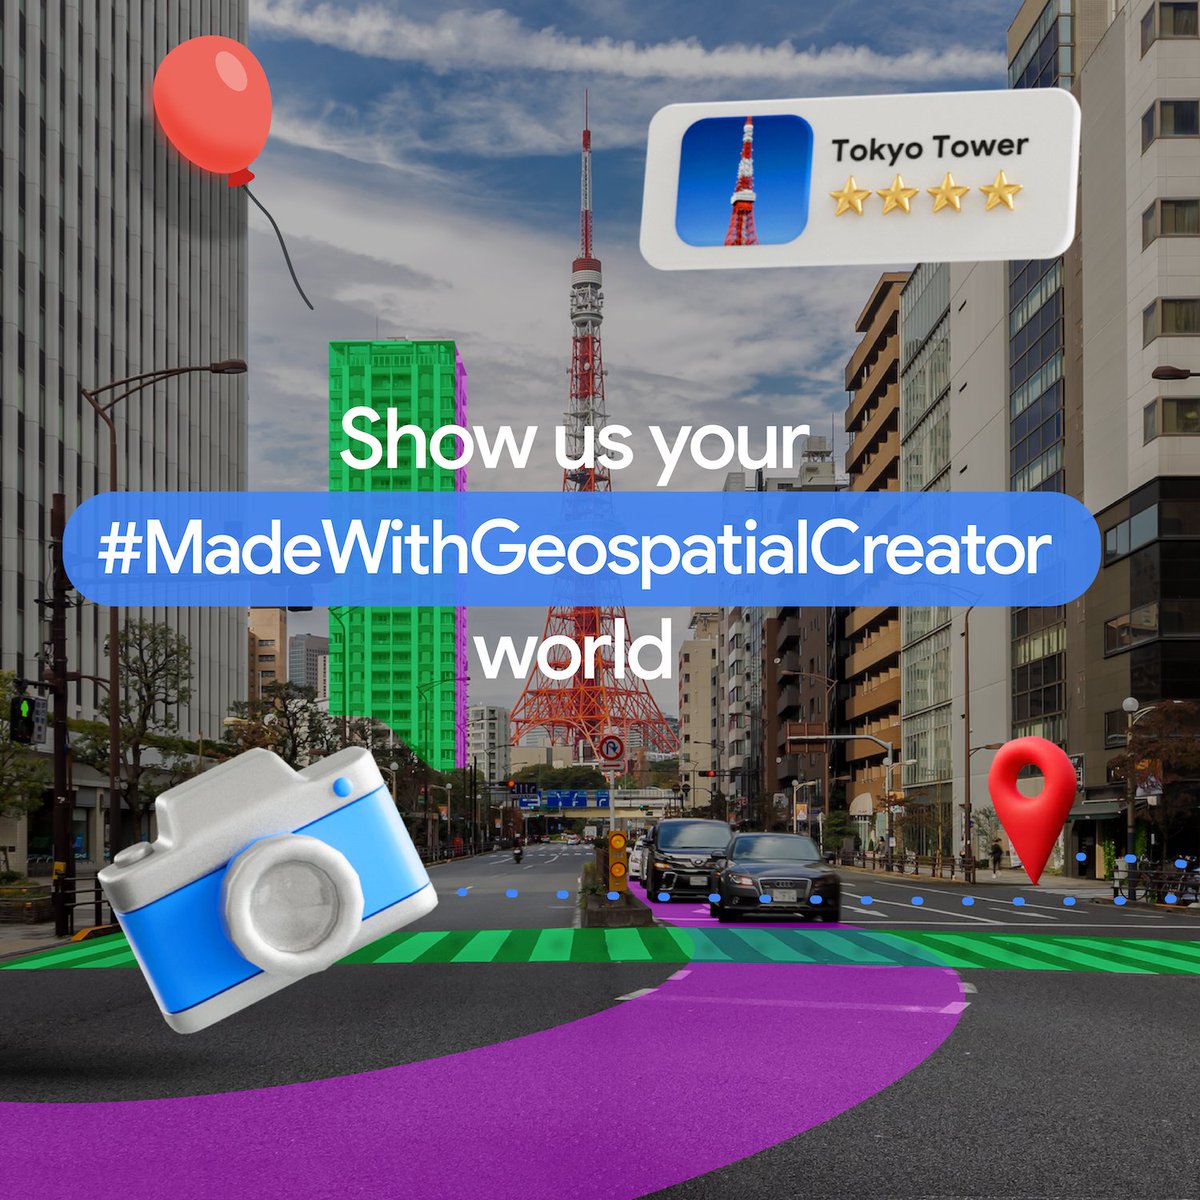 Map the world with your geospatial #AR projects and showcase your innovative creations with others. 🌎✨ Share your Geospatial Creator projects using #MadeWithGeospatialCreator for a chance to get featured on our feed!